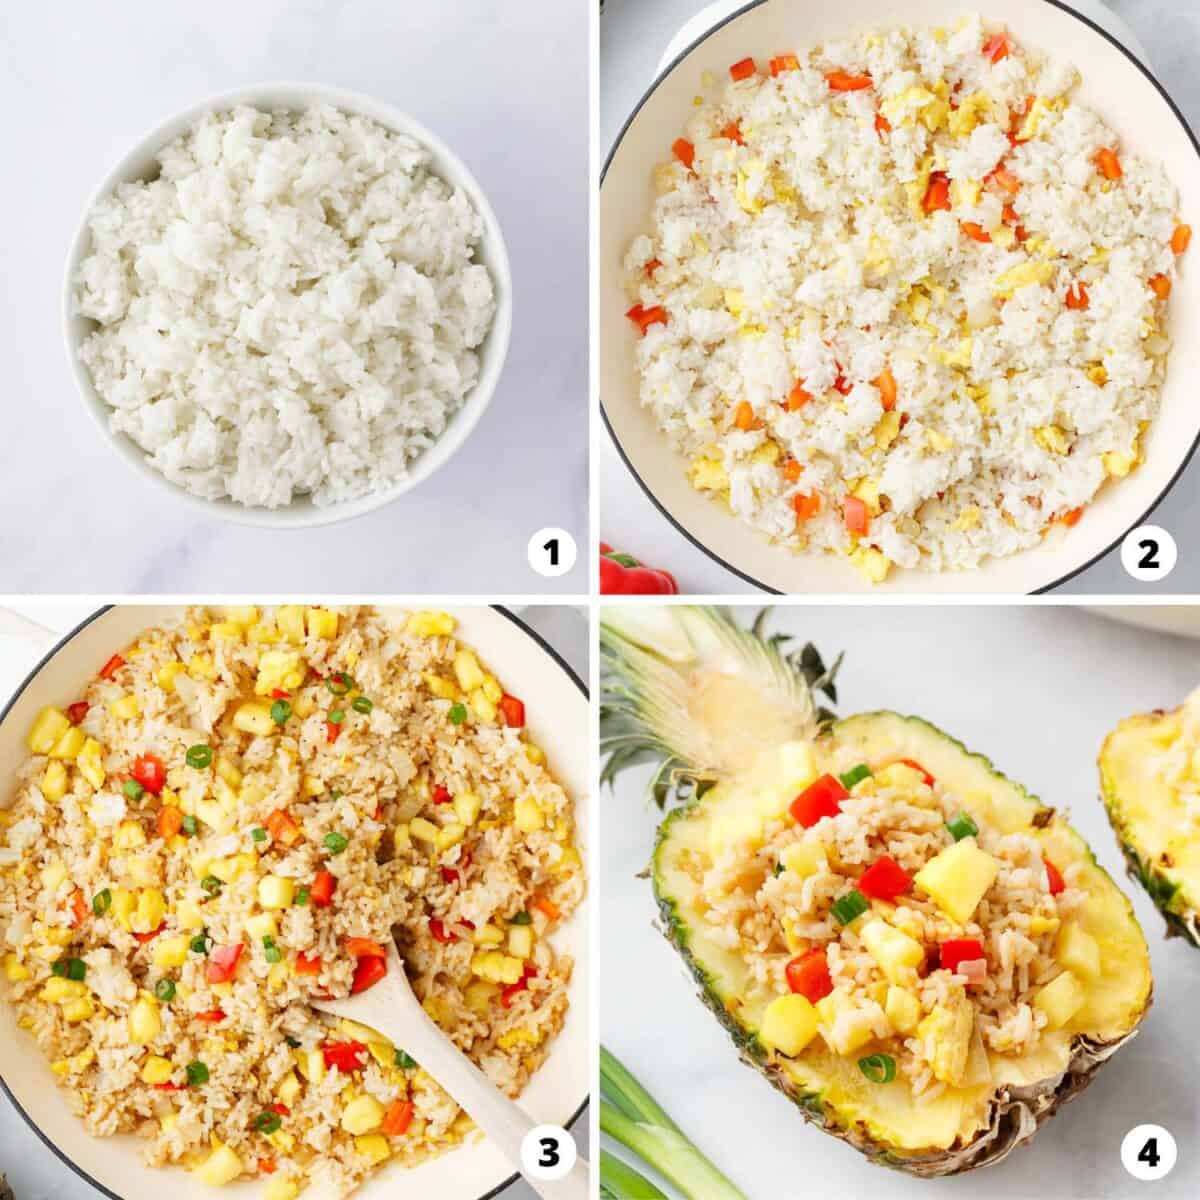 Showing how to make pineapple fried rice in a 4 step collage.